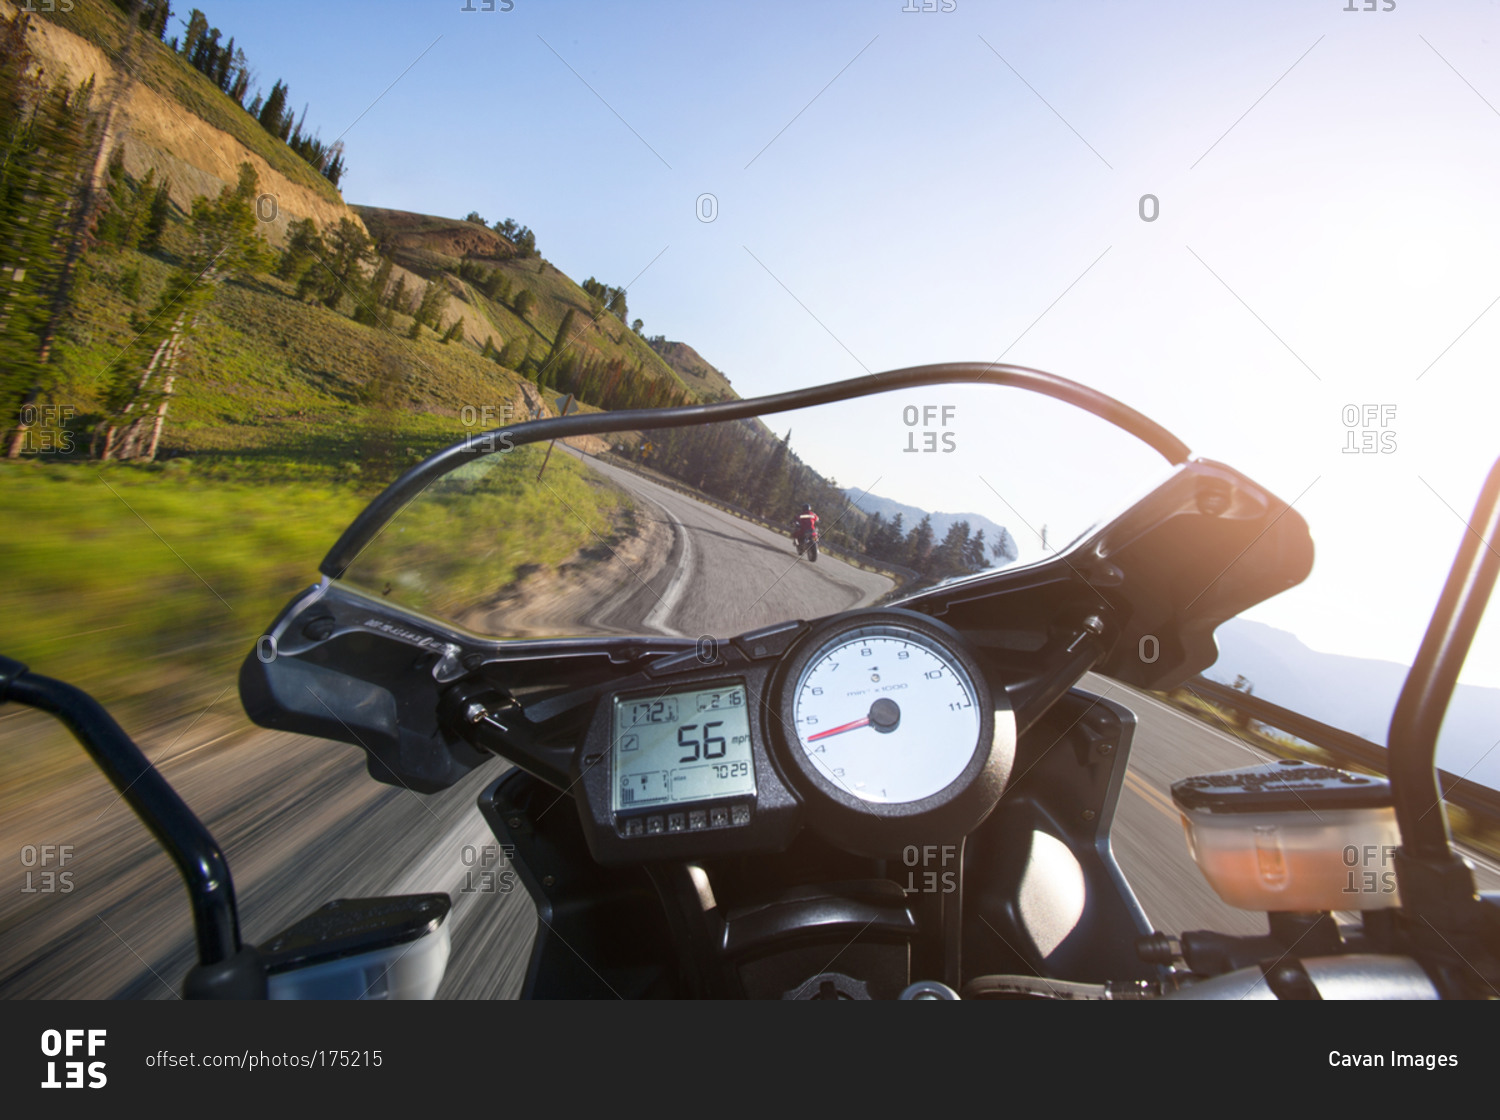 A driver's eye view of a motorcycle